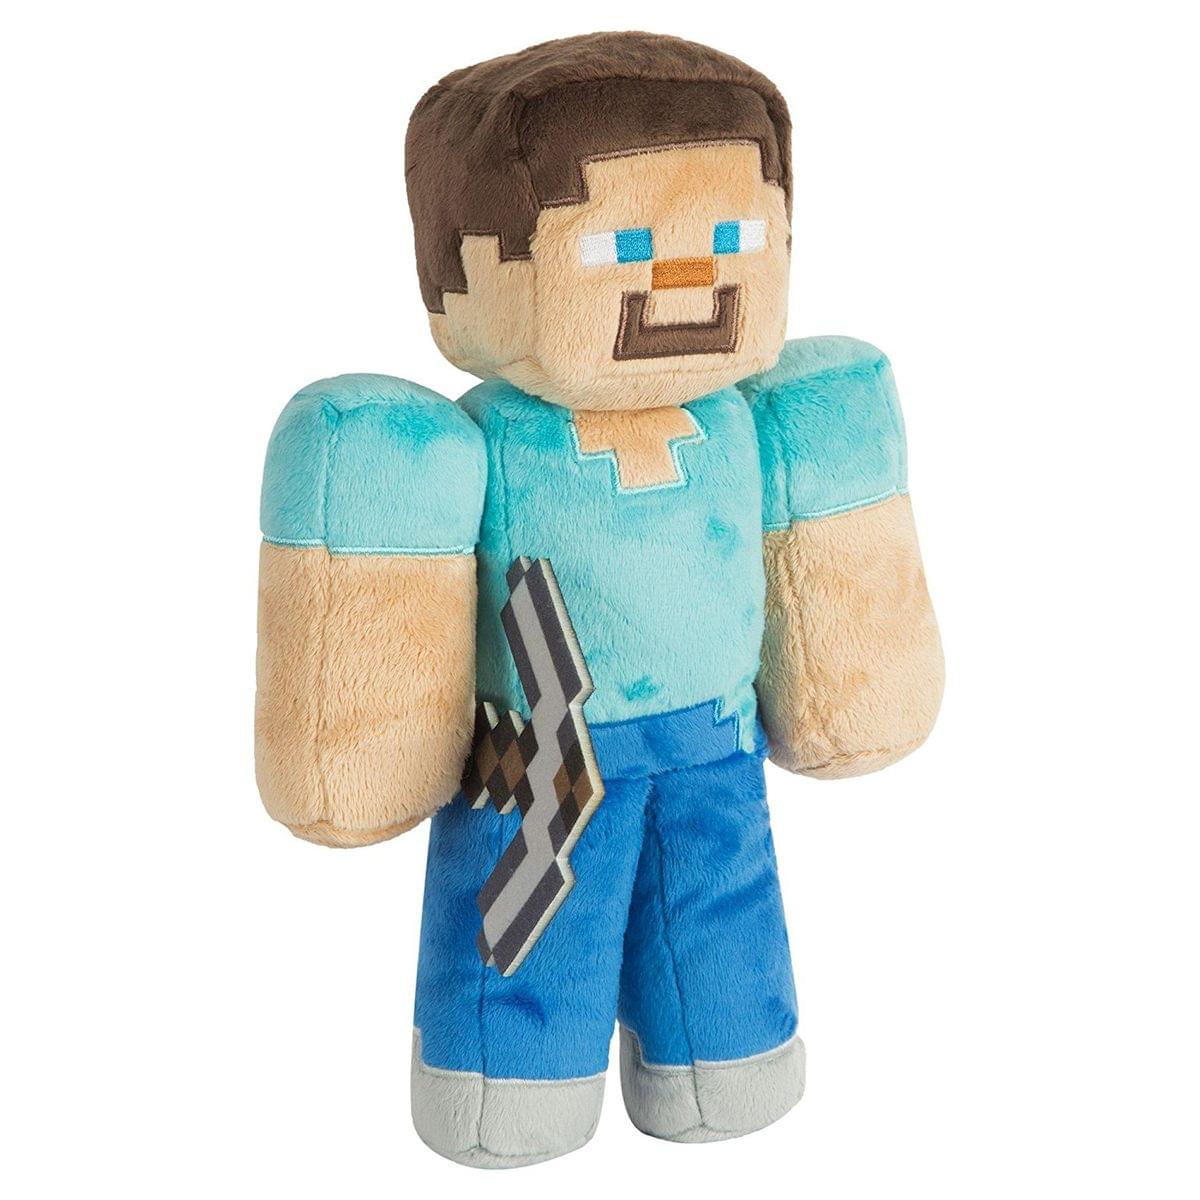 Minecraft Steve with Hang Tag Plush - image 1 of 2